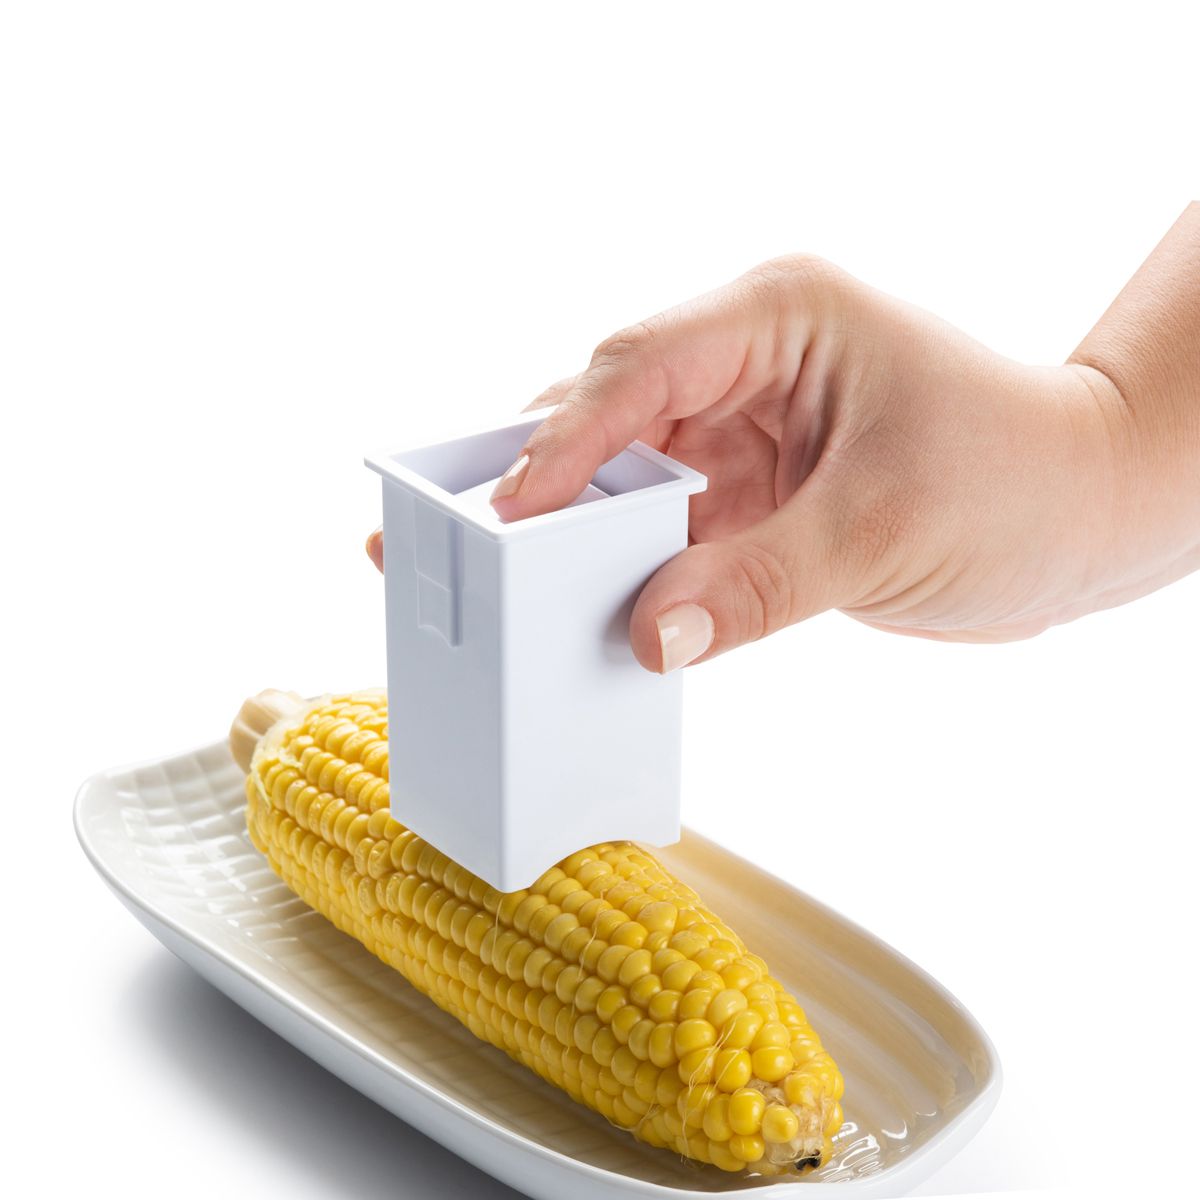 a persons hands demonstrating the use of the corn cob butterer on corn resting on a white plate